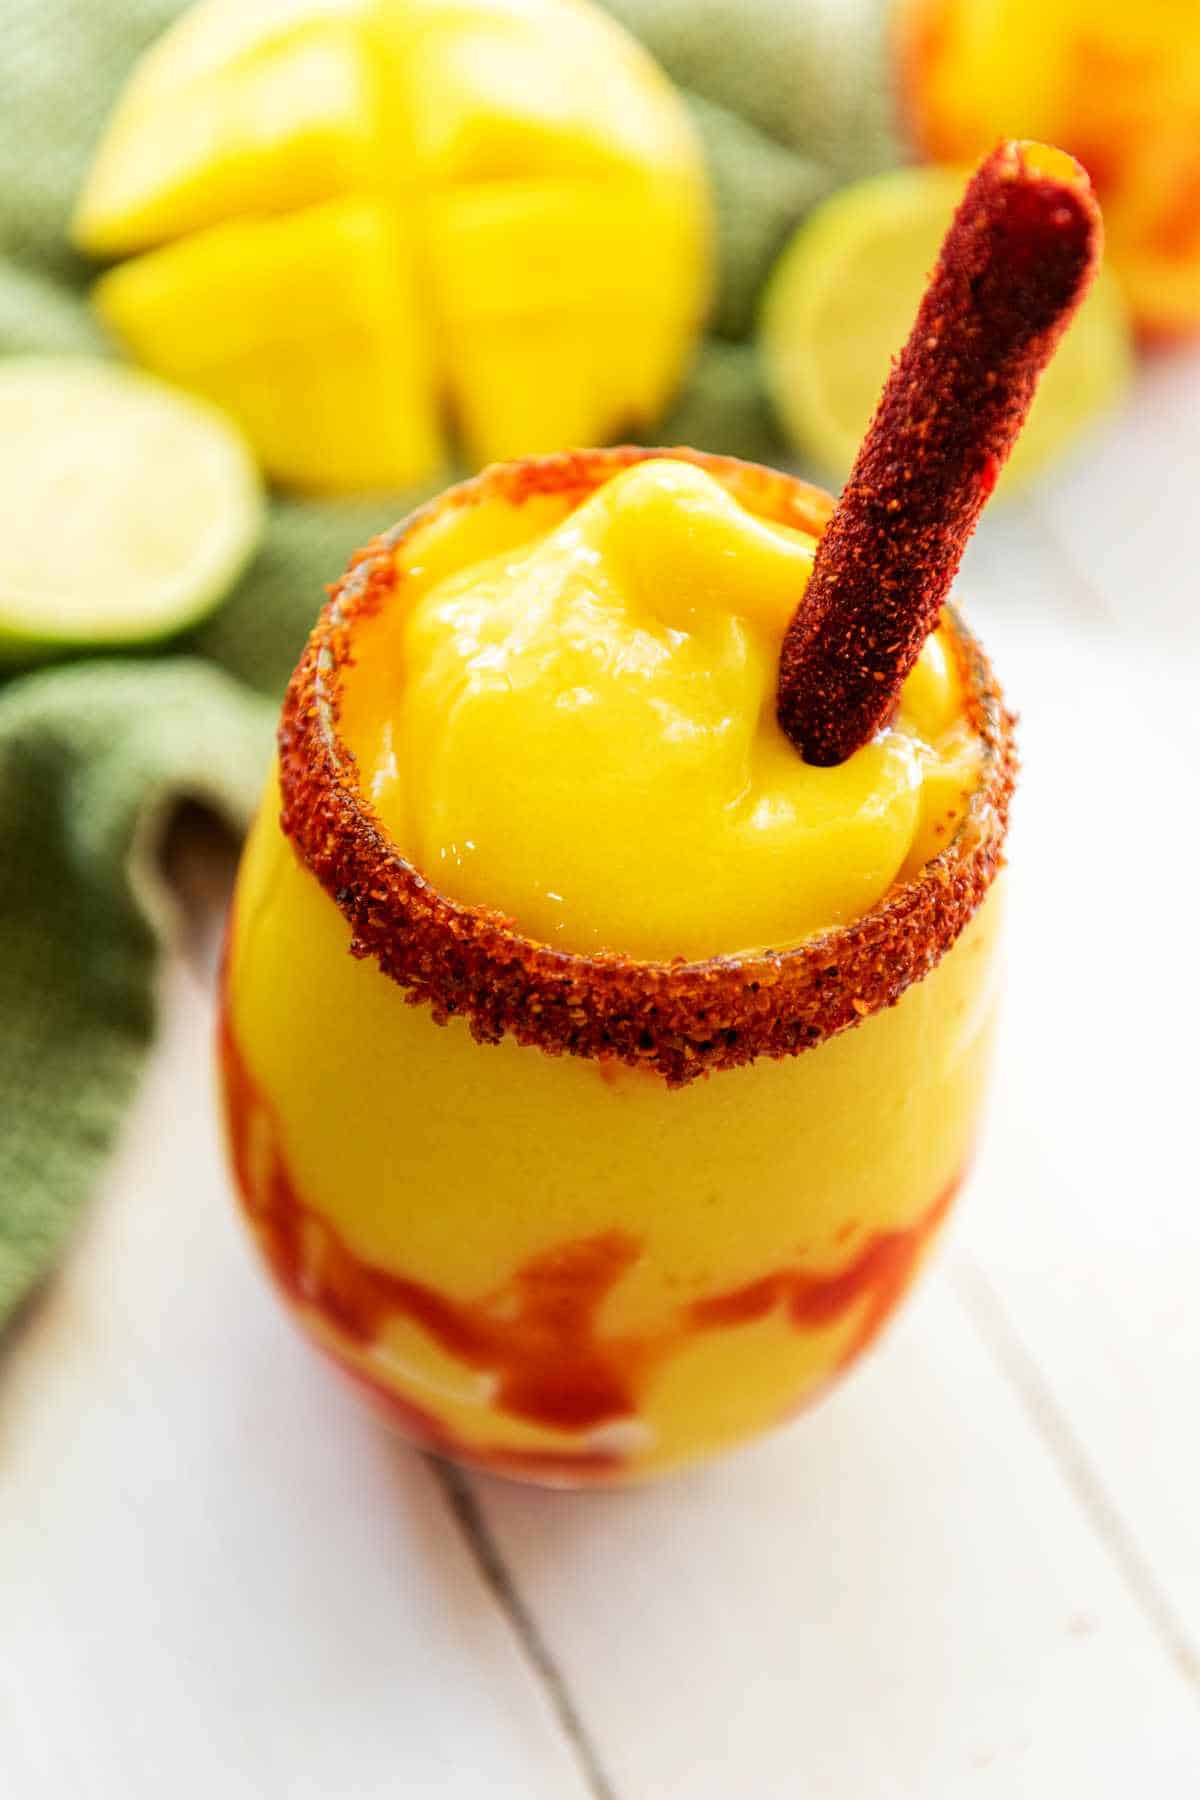 Chamoy and Tajin rimmed glass filled with some mango Mangonada and a tamarind candy stick.